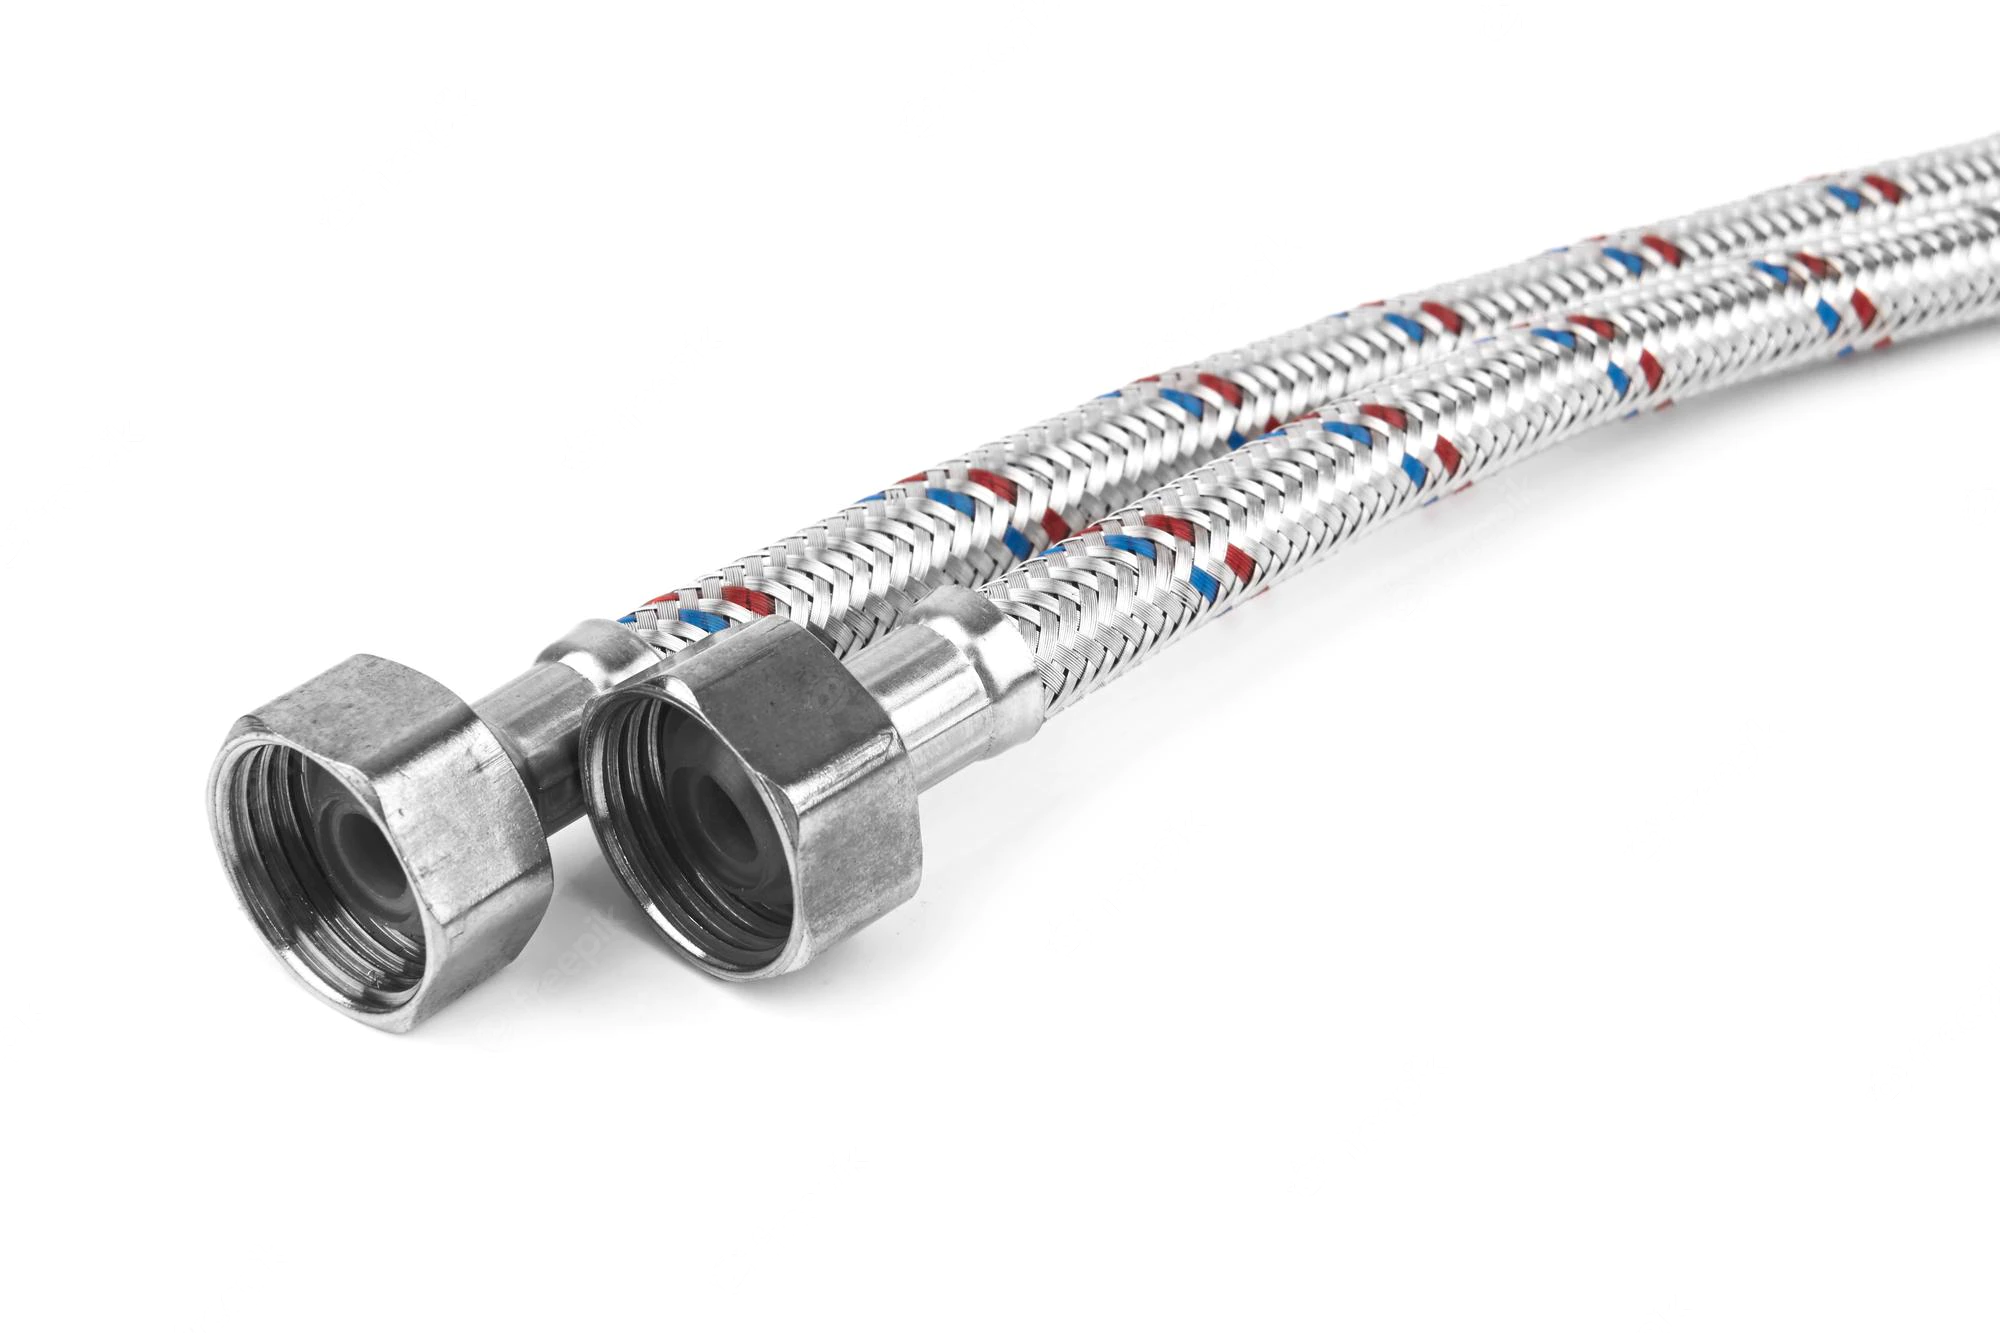 Which is better – a spiral or braided hydraulic Hose